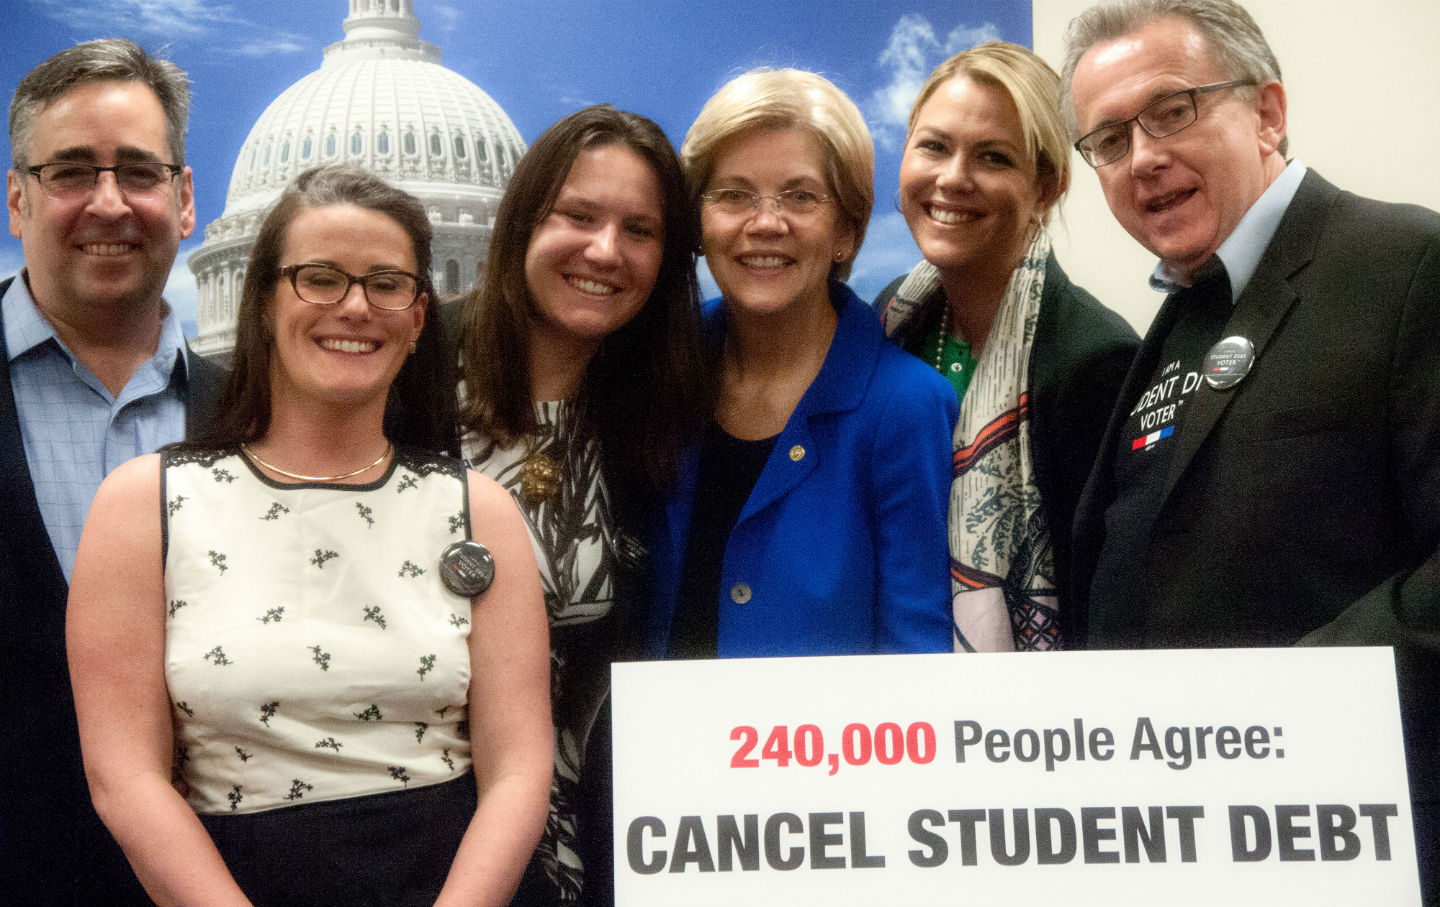 At Least 240,000 People Want to Cancel All Student Debt